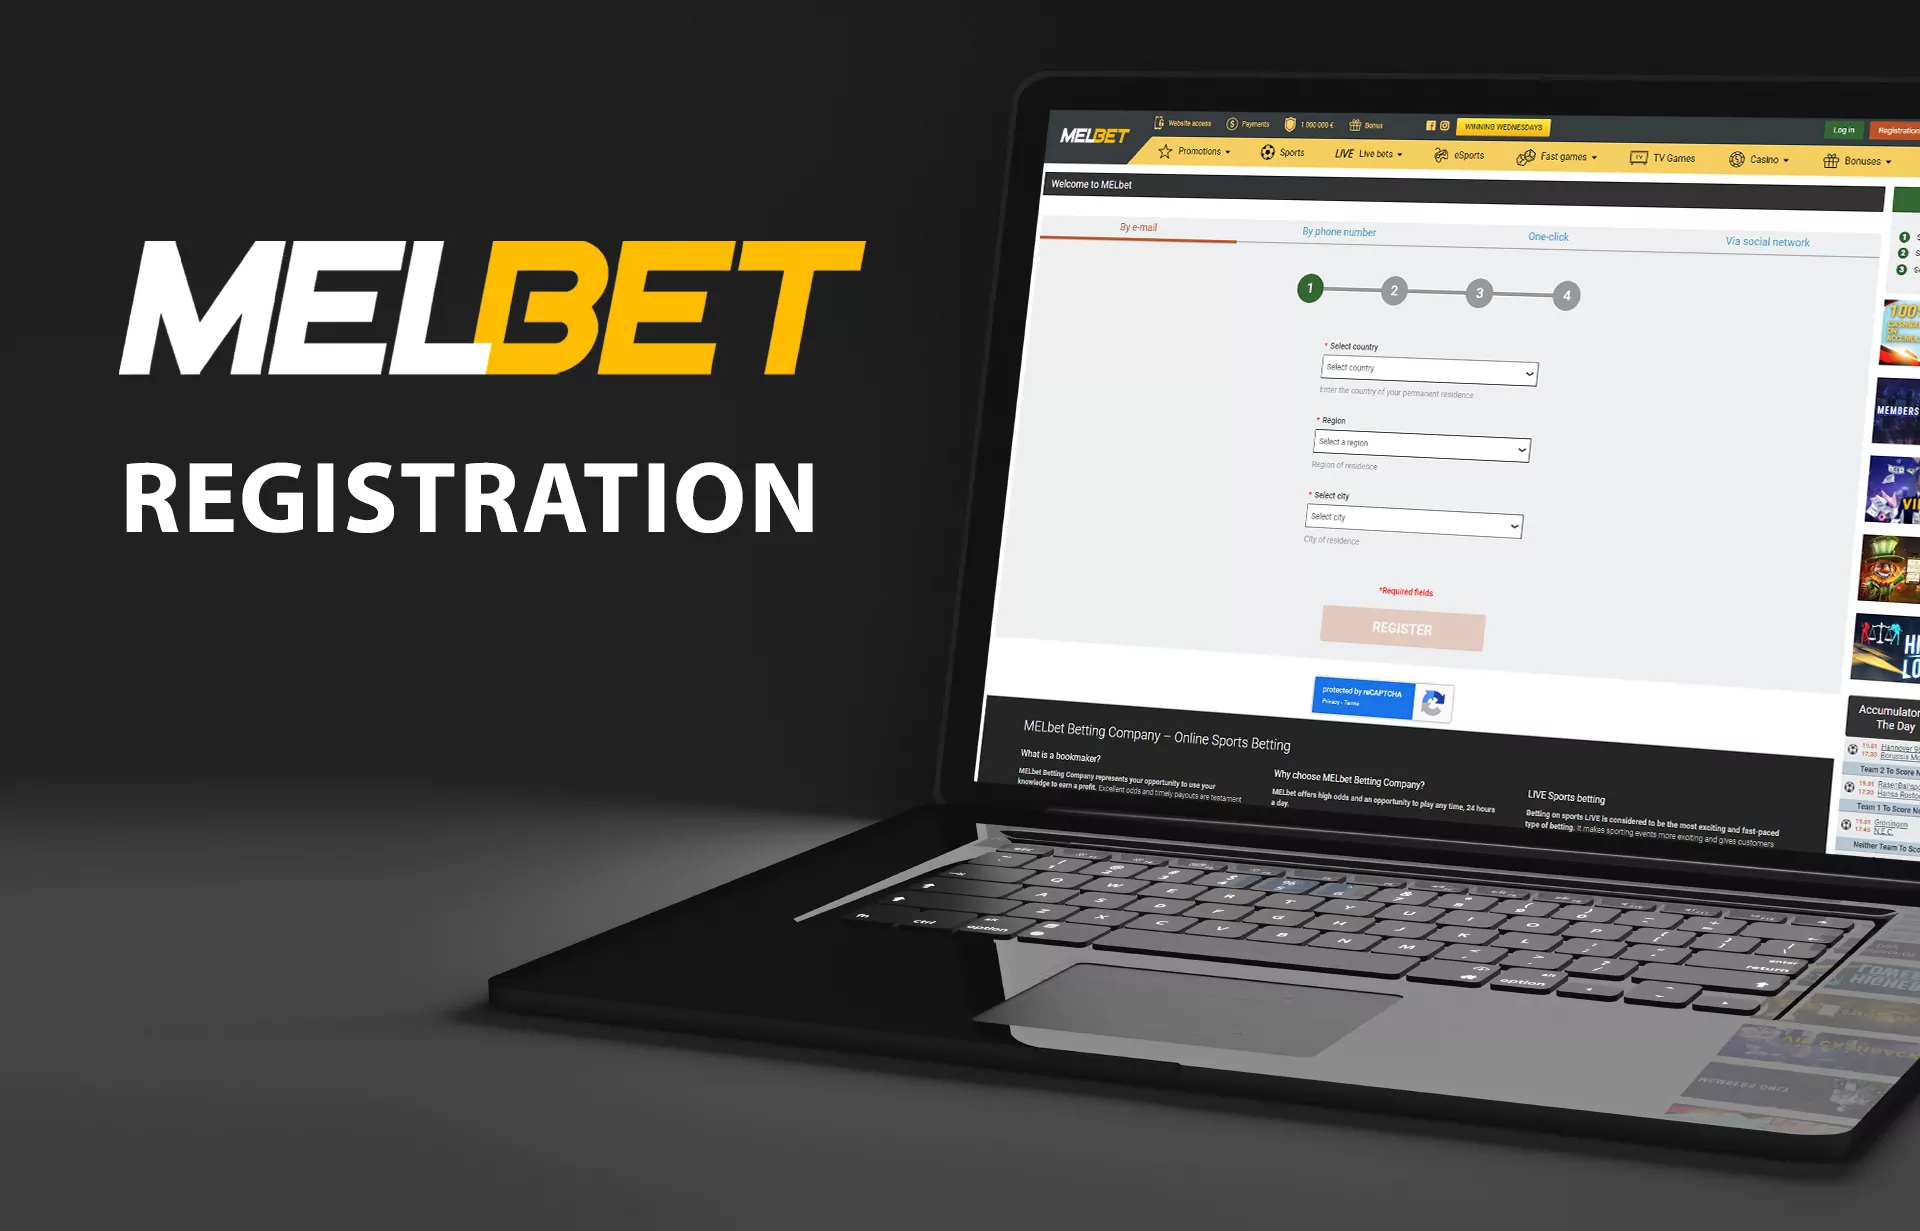 To create a new account, visit the official page of Melbet and click on the 'Registration' button.